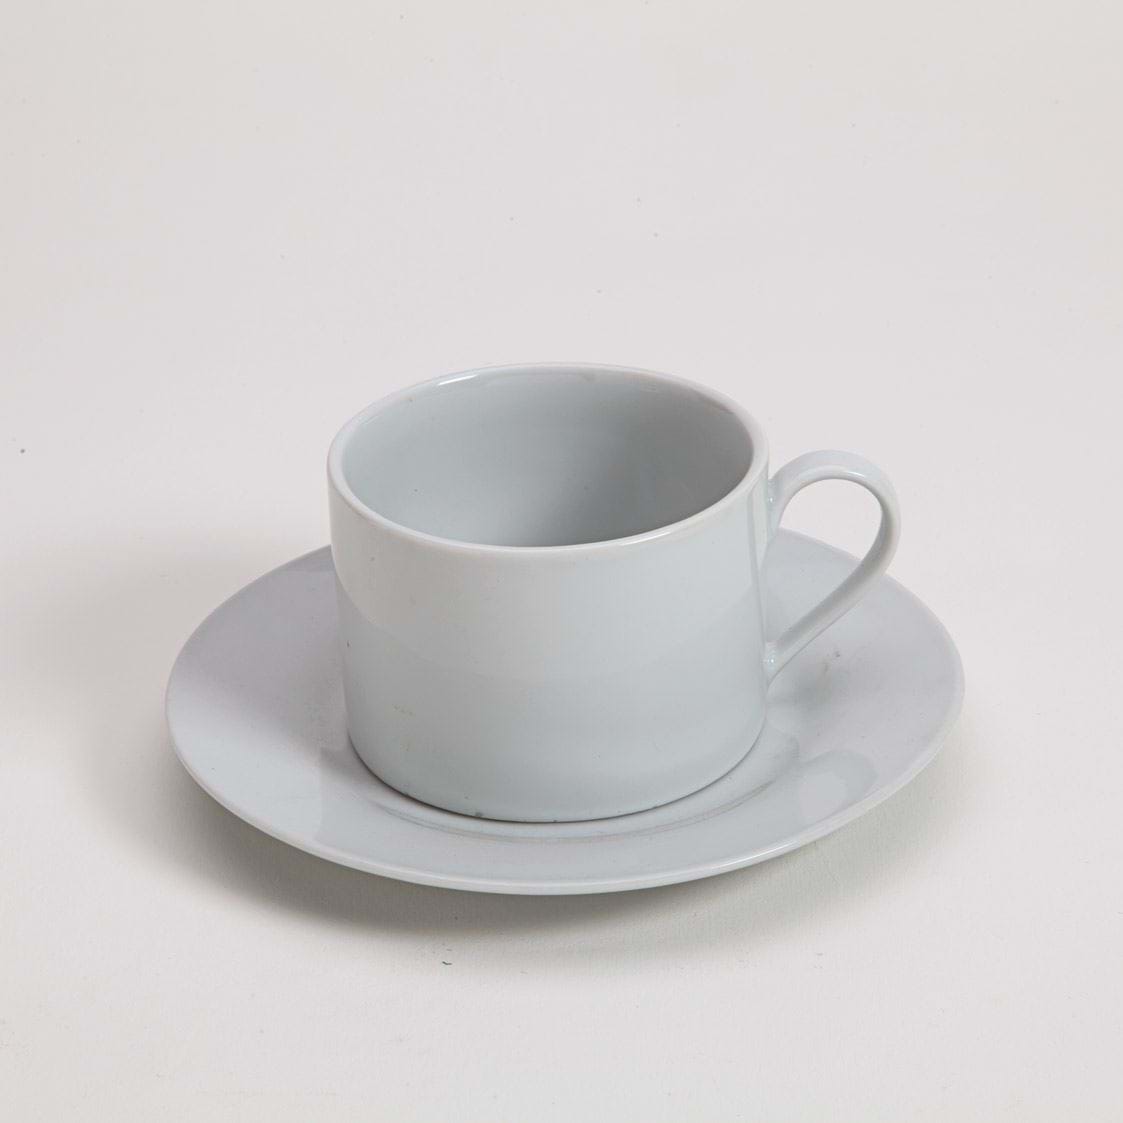 Pearl white can cup and saucer